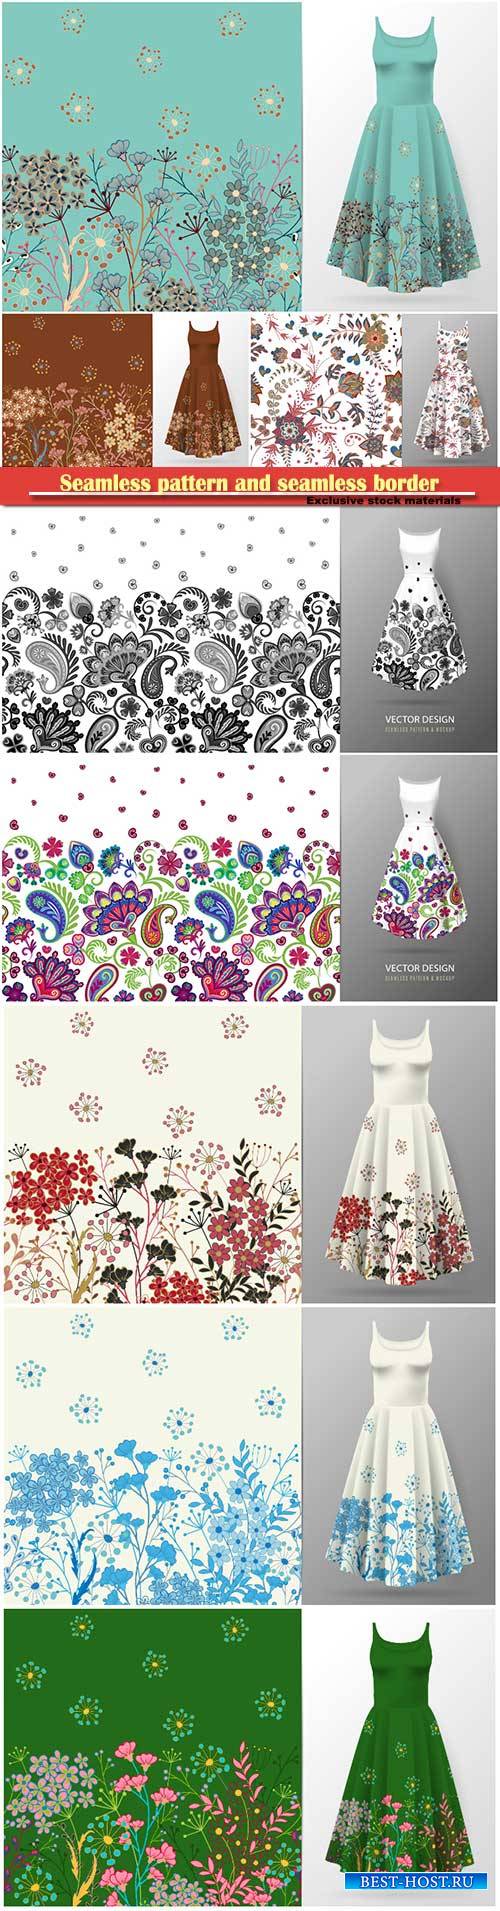 Seamless pattern and seamless border for dress mock up vector illustration